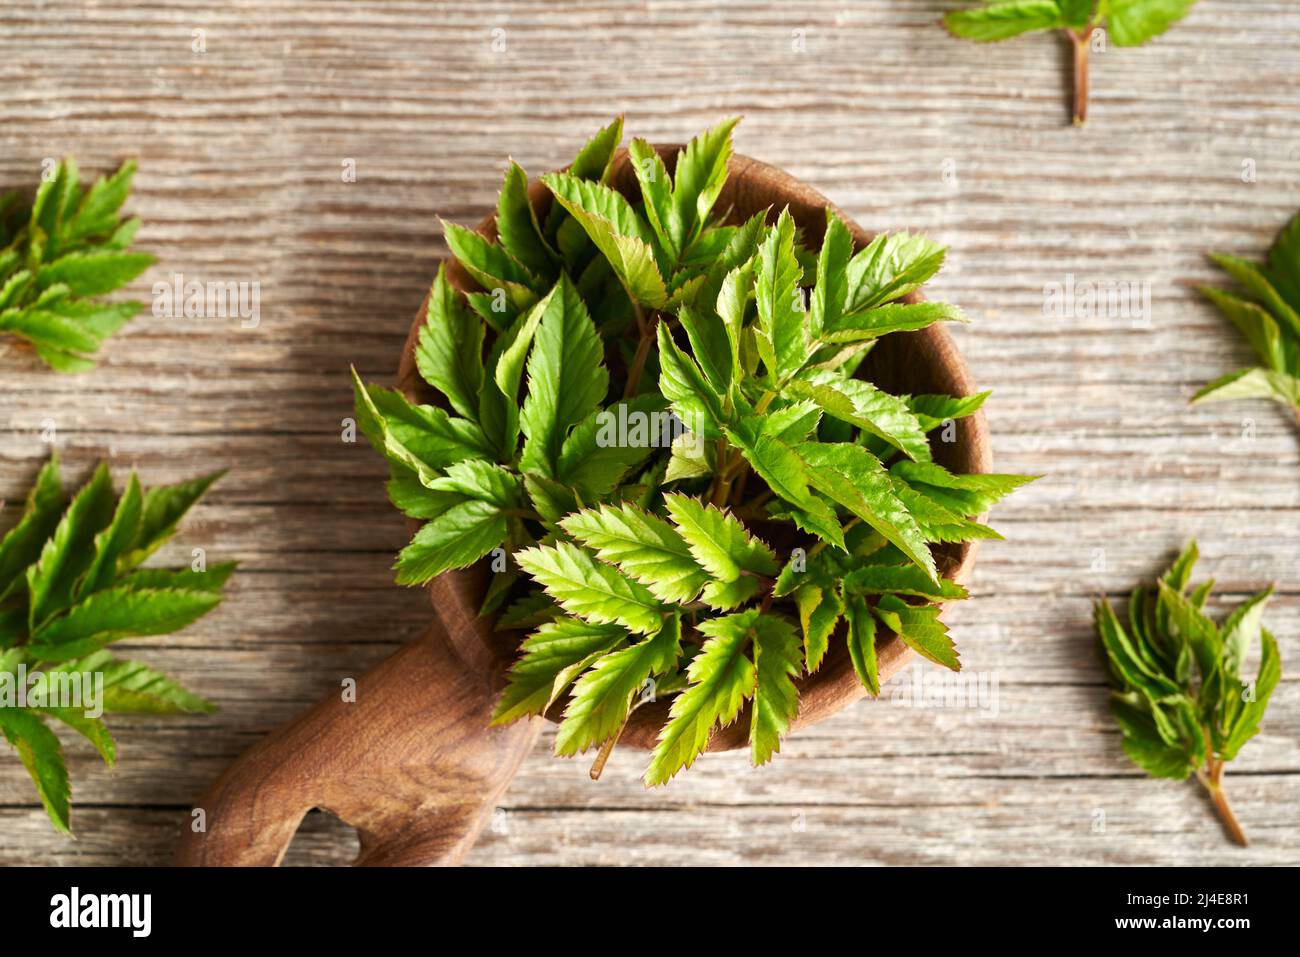 Fresh young ground elder or Aegopodium podagraria leaves collected in early spring on a spoon, top view Stock Photo